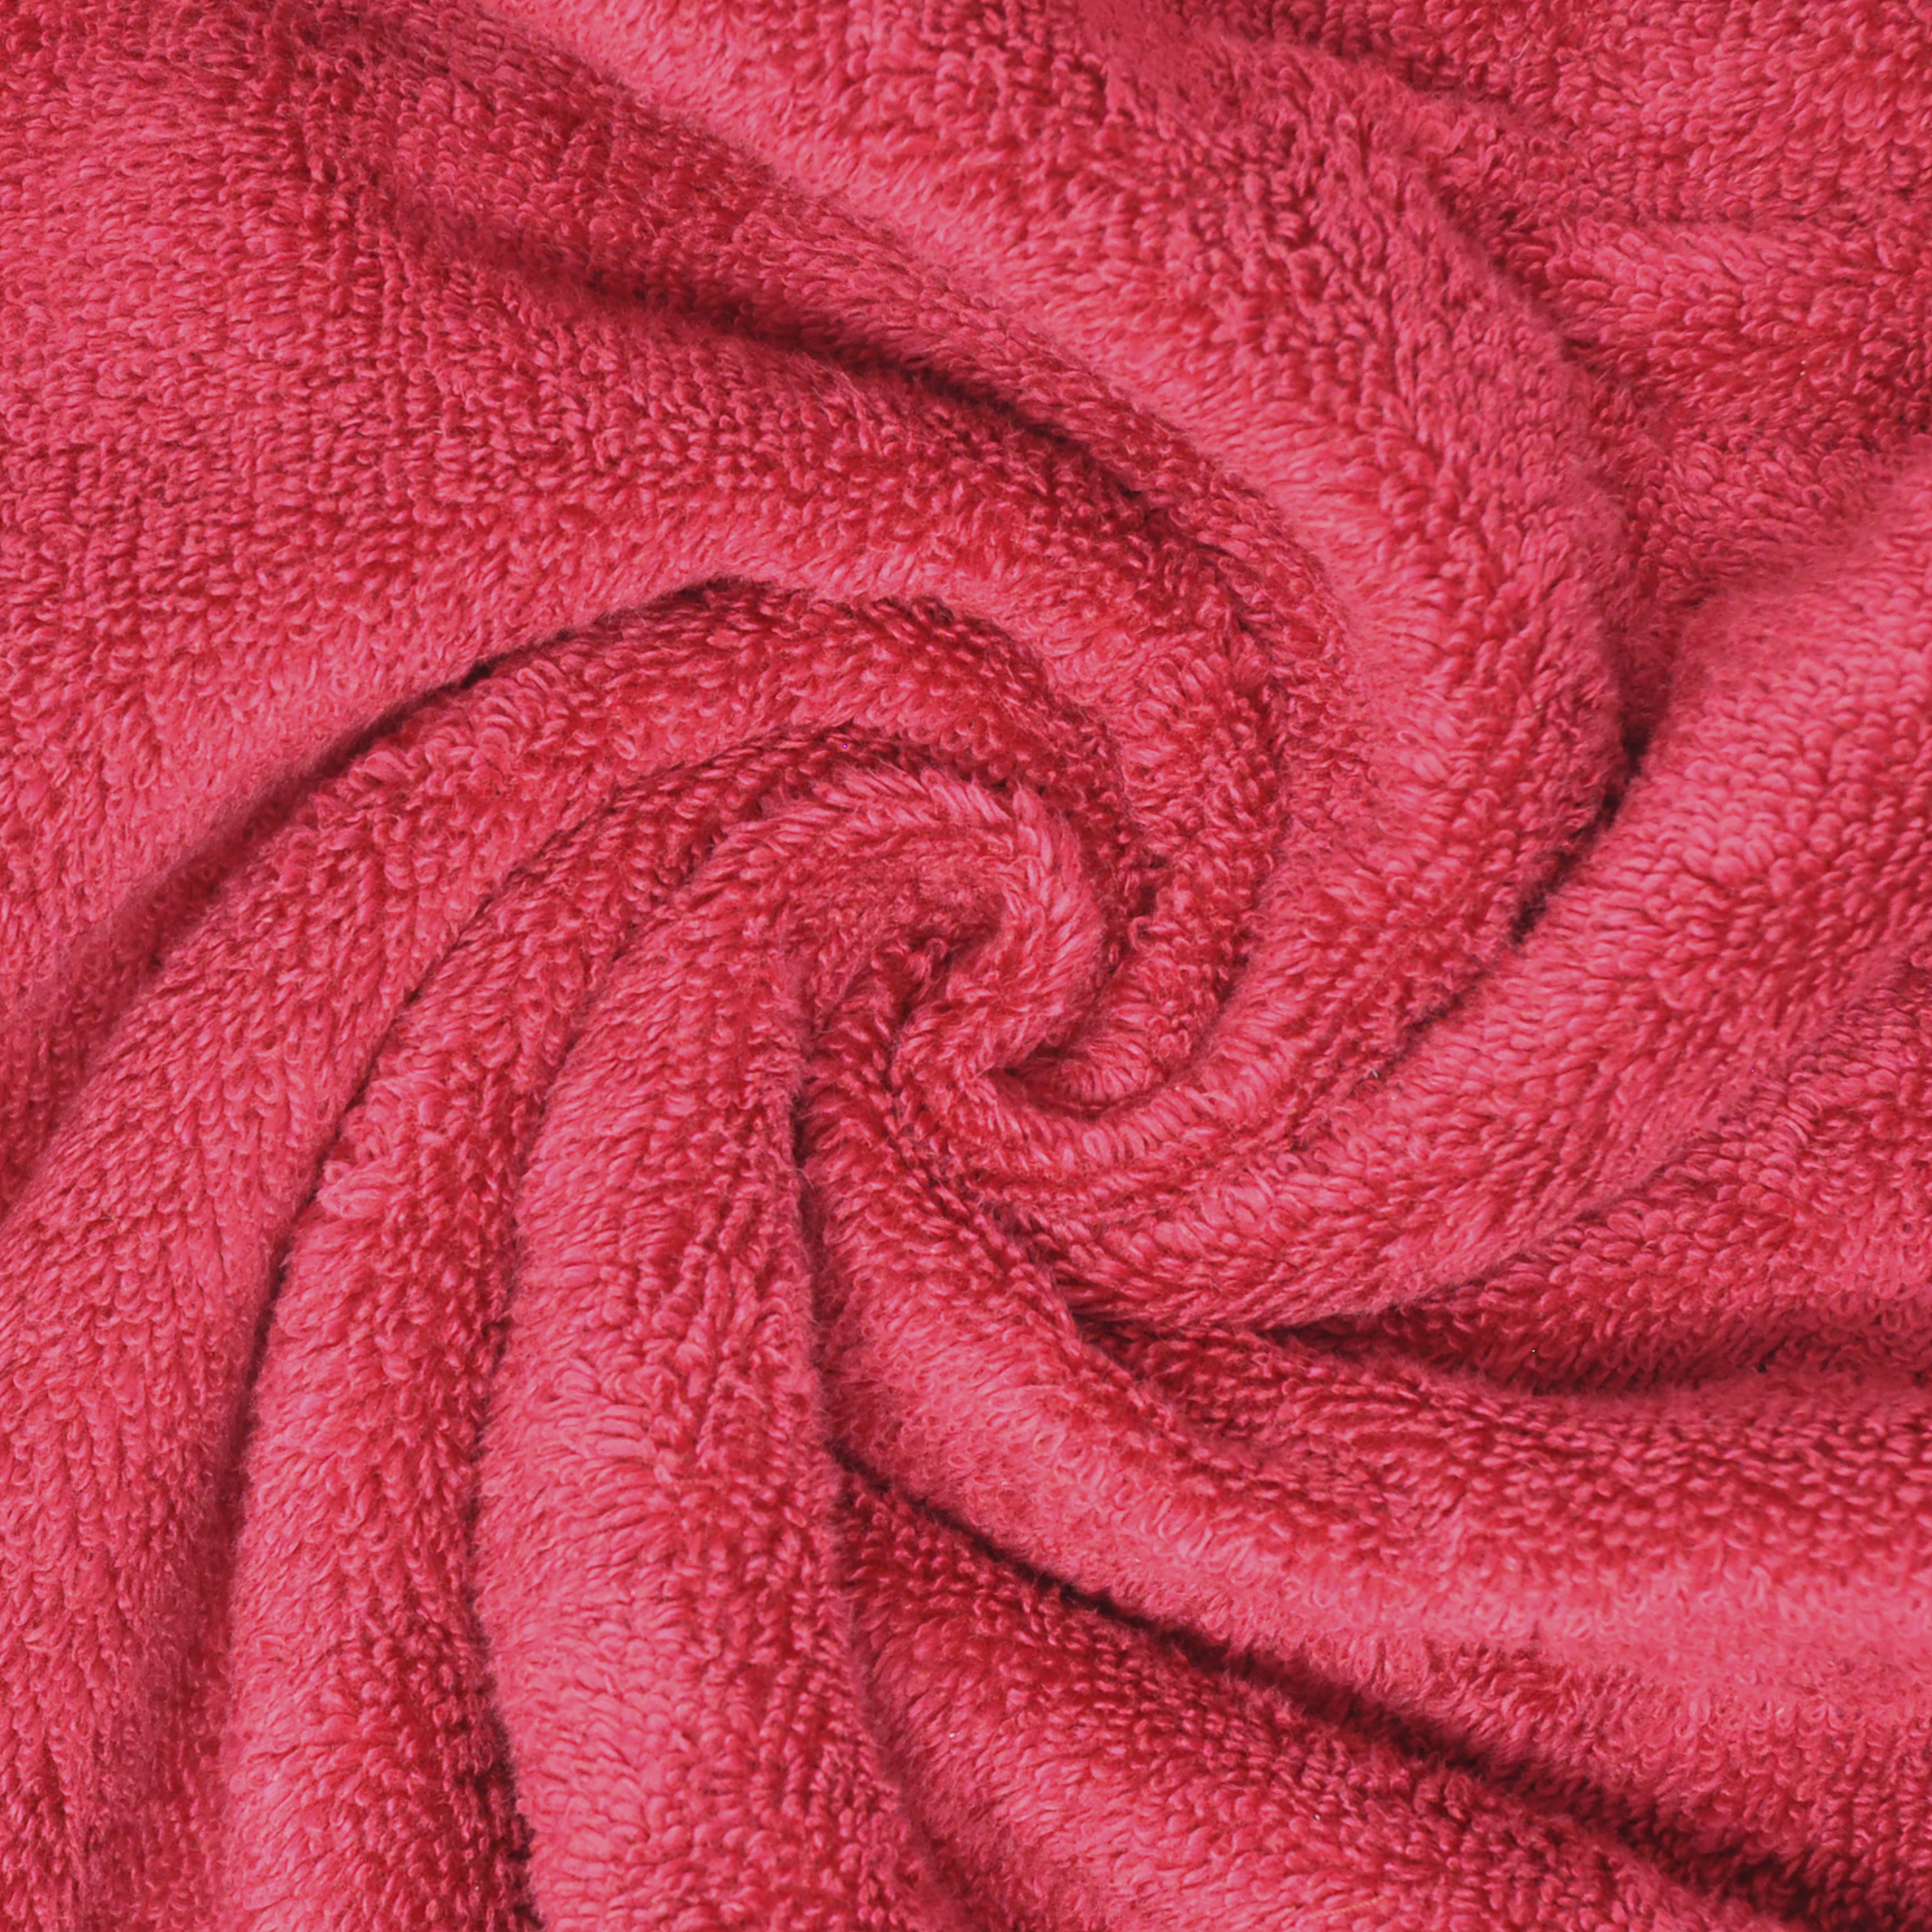 Mainstays Performance Solid 6 Piece Towel Set, Red - image 4 of 7